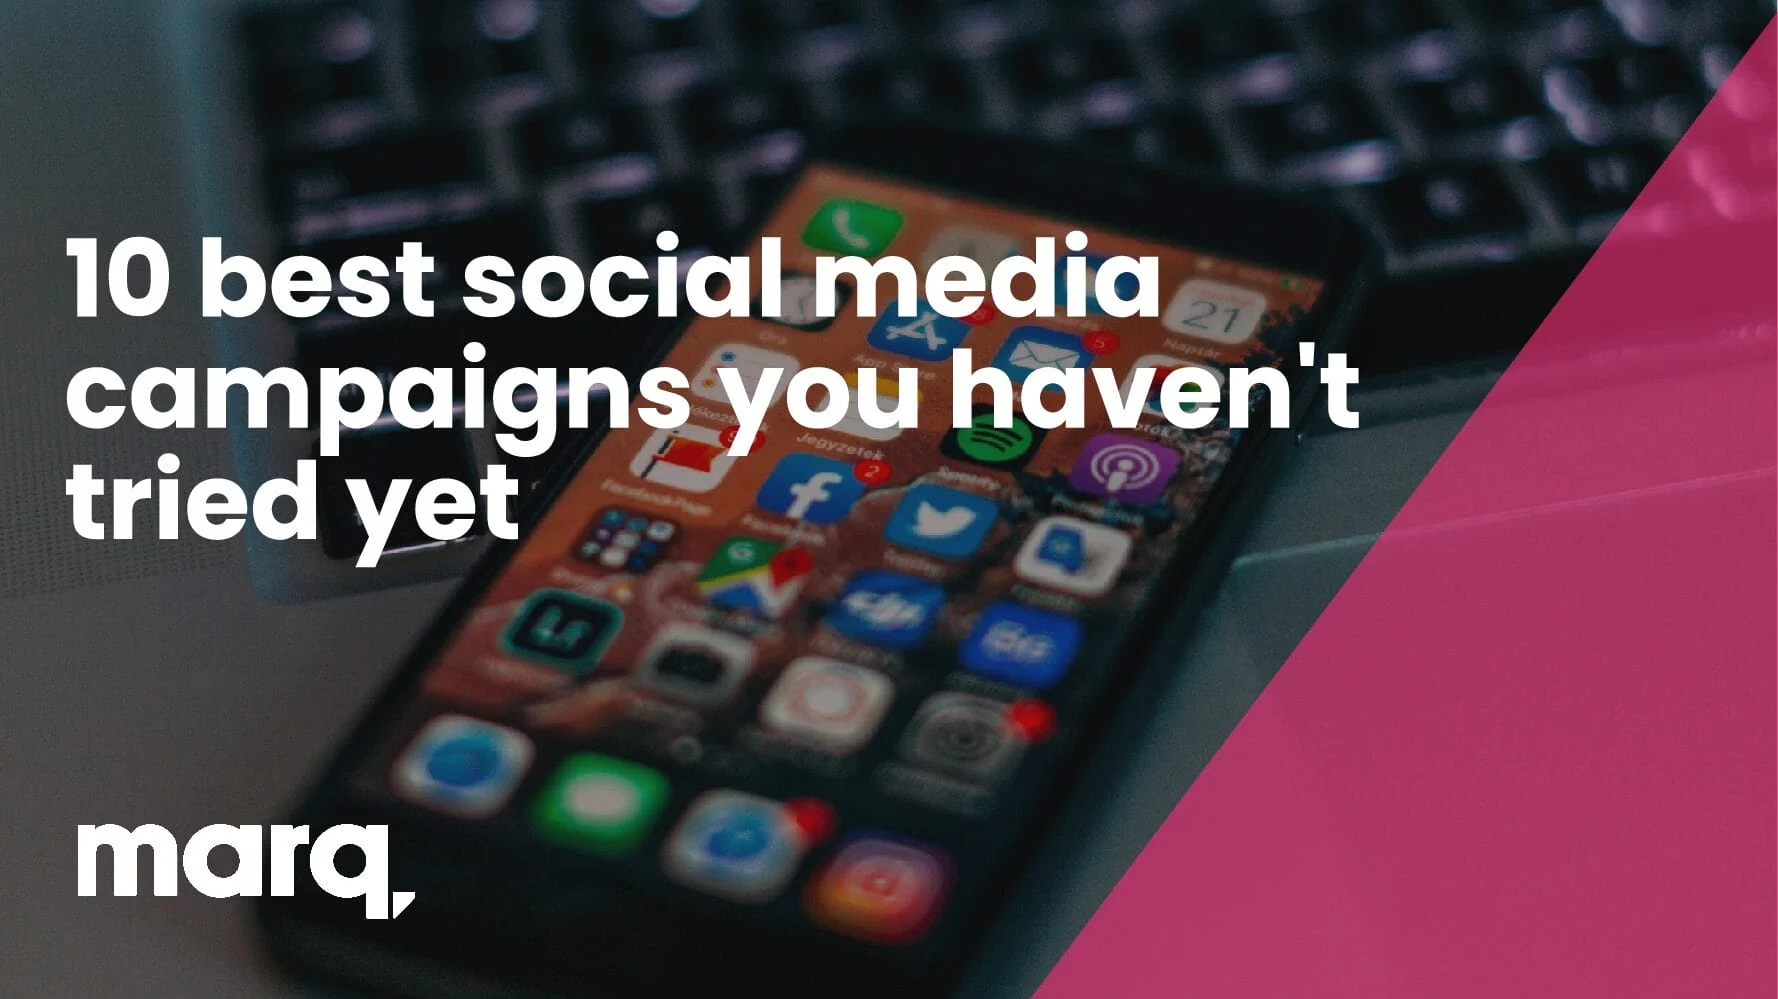 10 best social media campaigns you haven’t tried yet